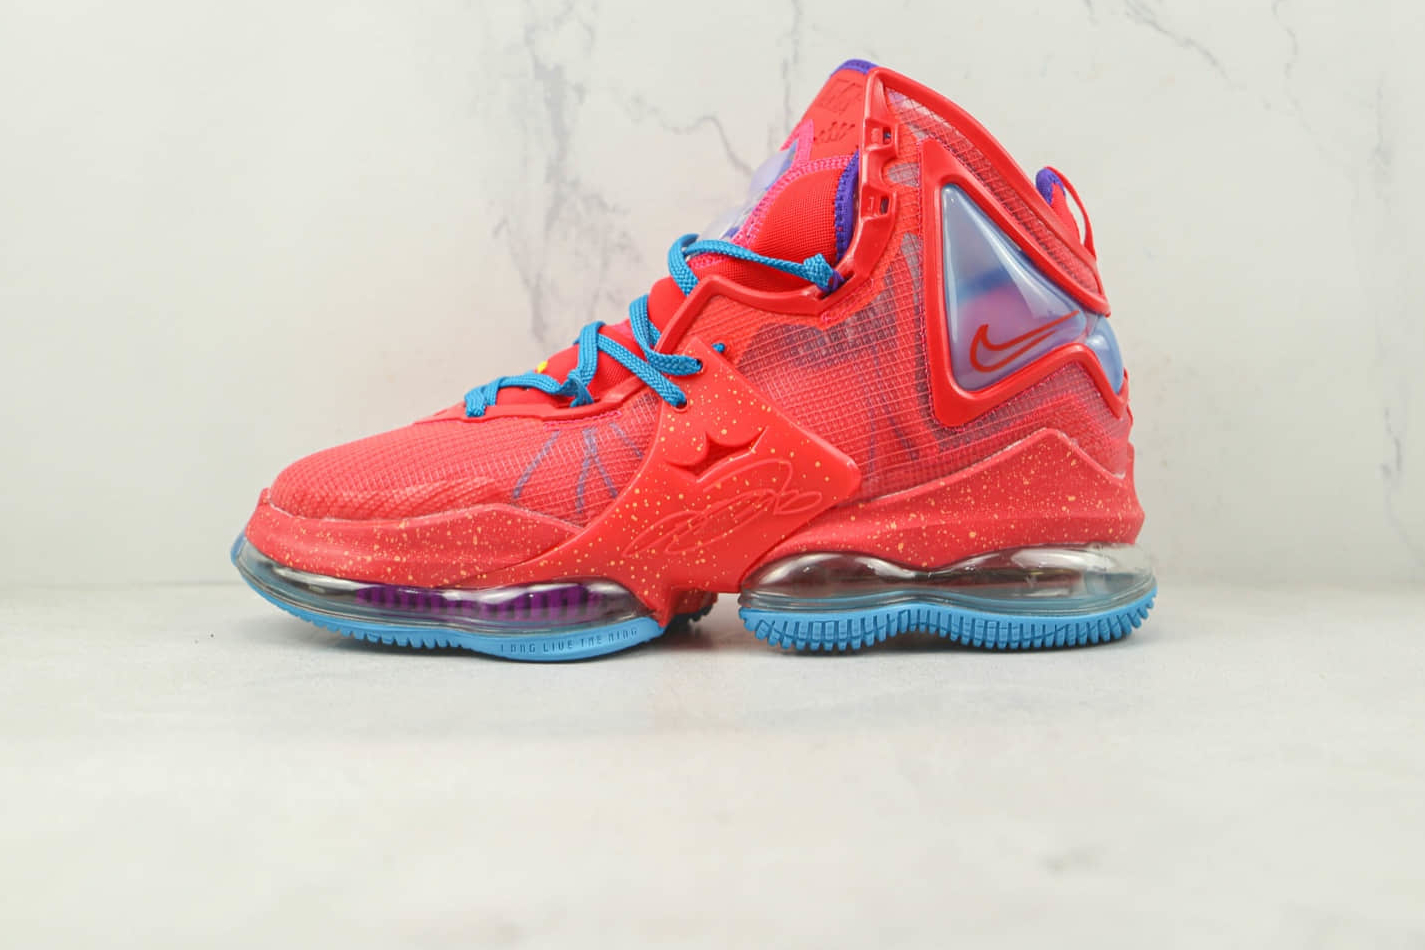 Nike LeBron 19 EP 'Valentine's Day' DH8460-900 - Limited Edition for Love